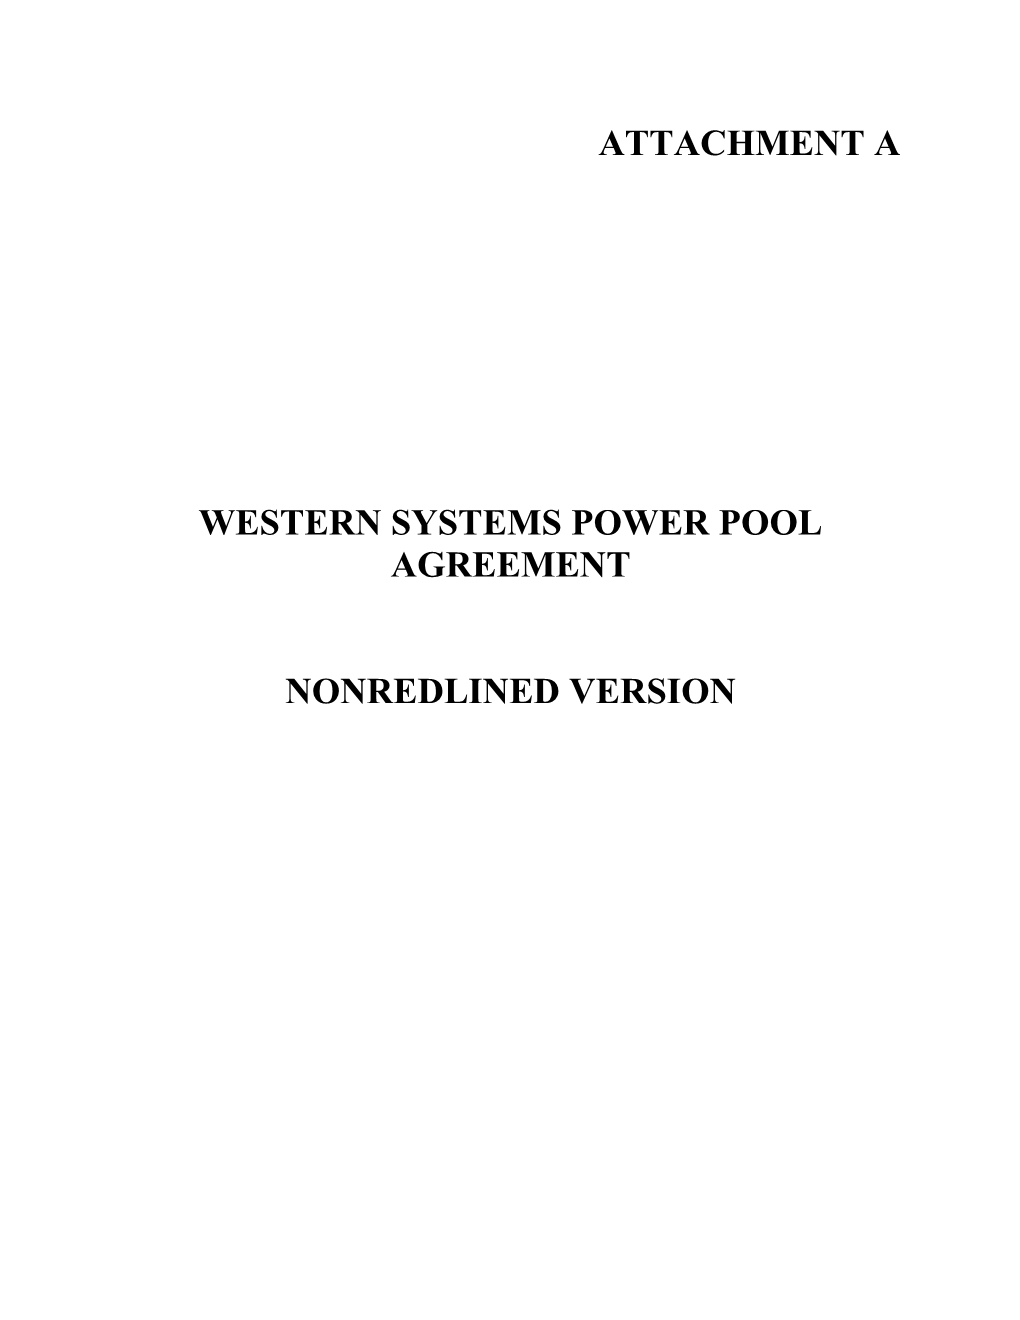 Western Systems Power Pool Agreement, Effective February 1, 2003 (Copyright Western Systems